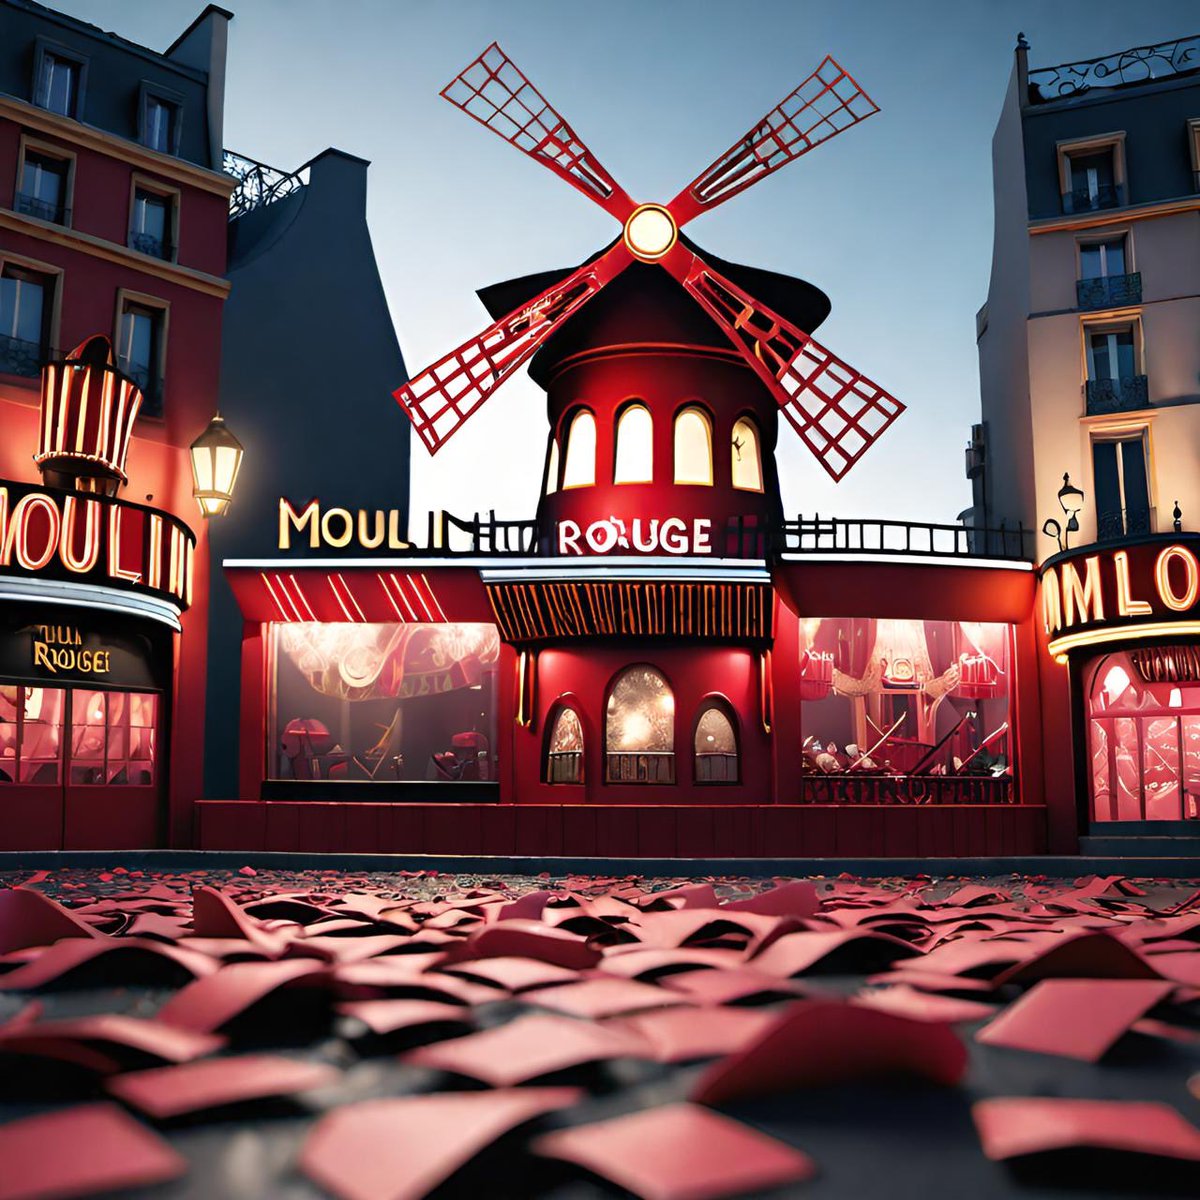 Gm on Thirsty Thursday
The downfall of decadence...
Sad... Have you ever been in the Moulin Rouge in Paris? 
I have... Iconic 
Now it lost his blades #MoulinRouge